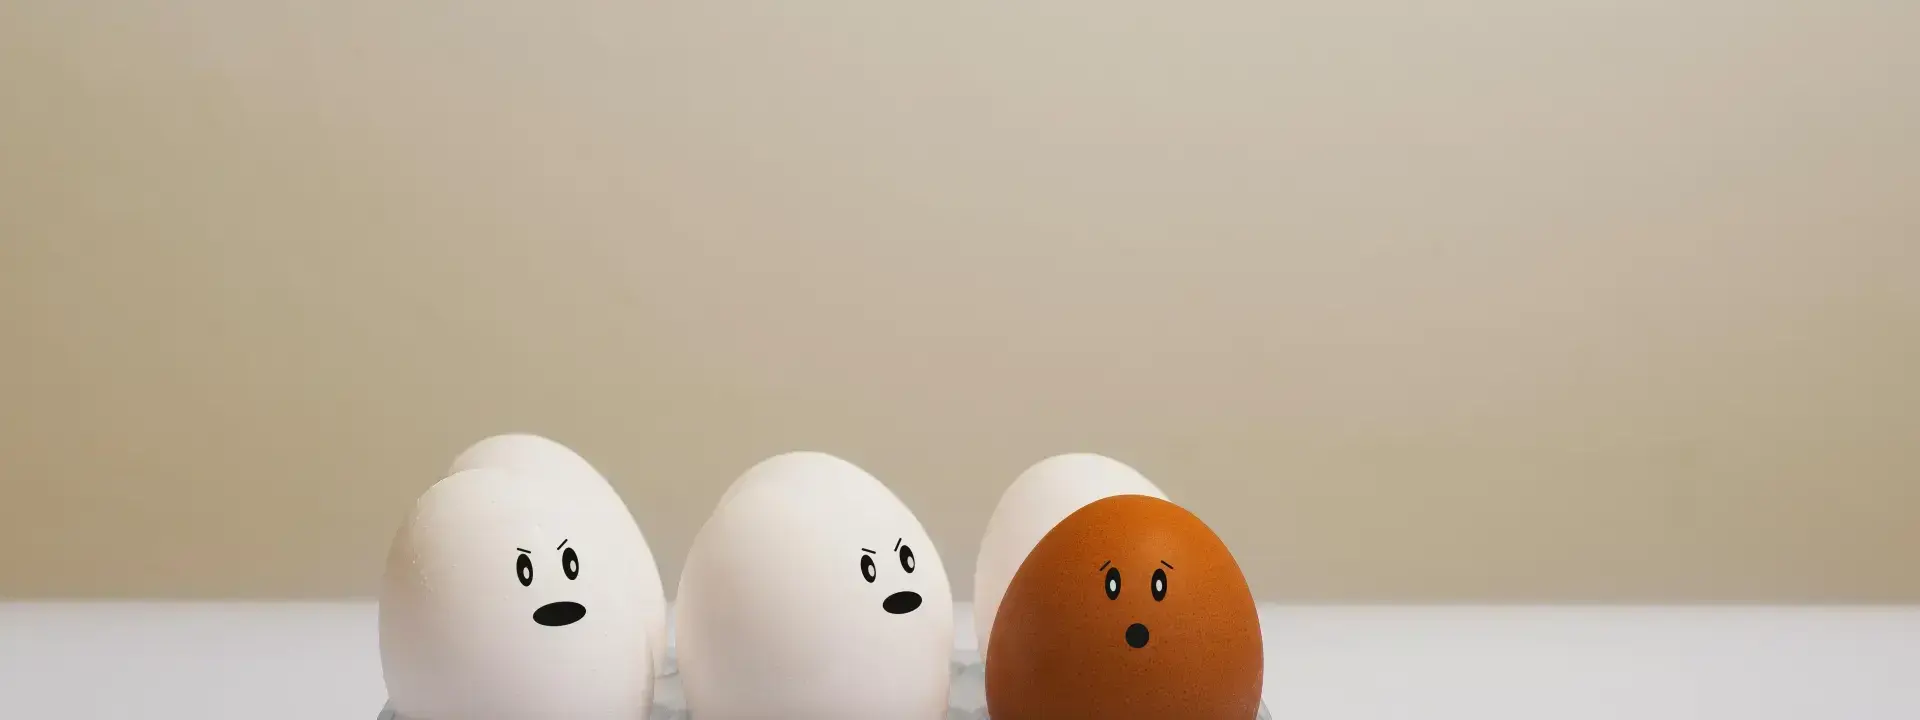 The Perils of Putting All Your Eggs in One Basket: Small Business Risks of Overdependence on a Single Client